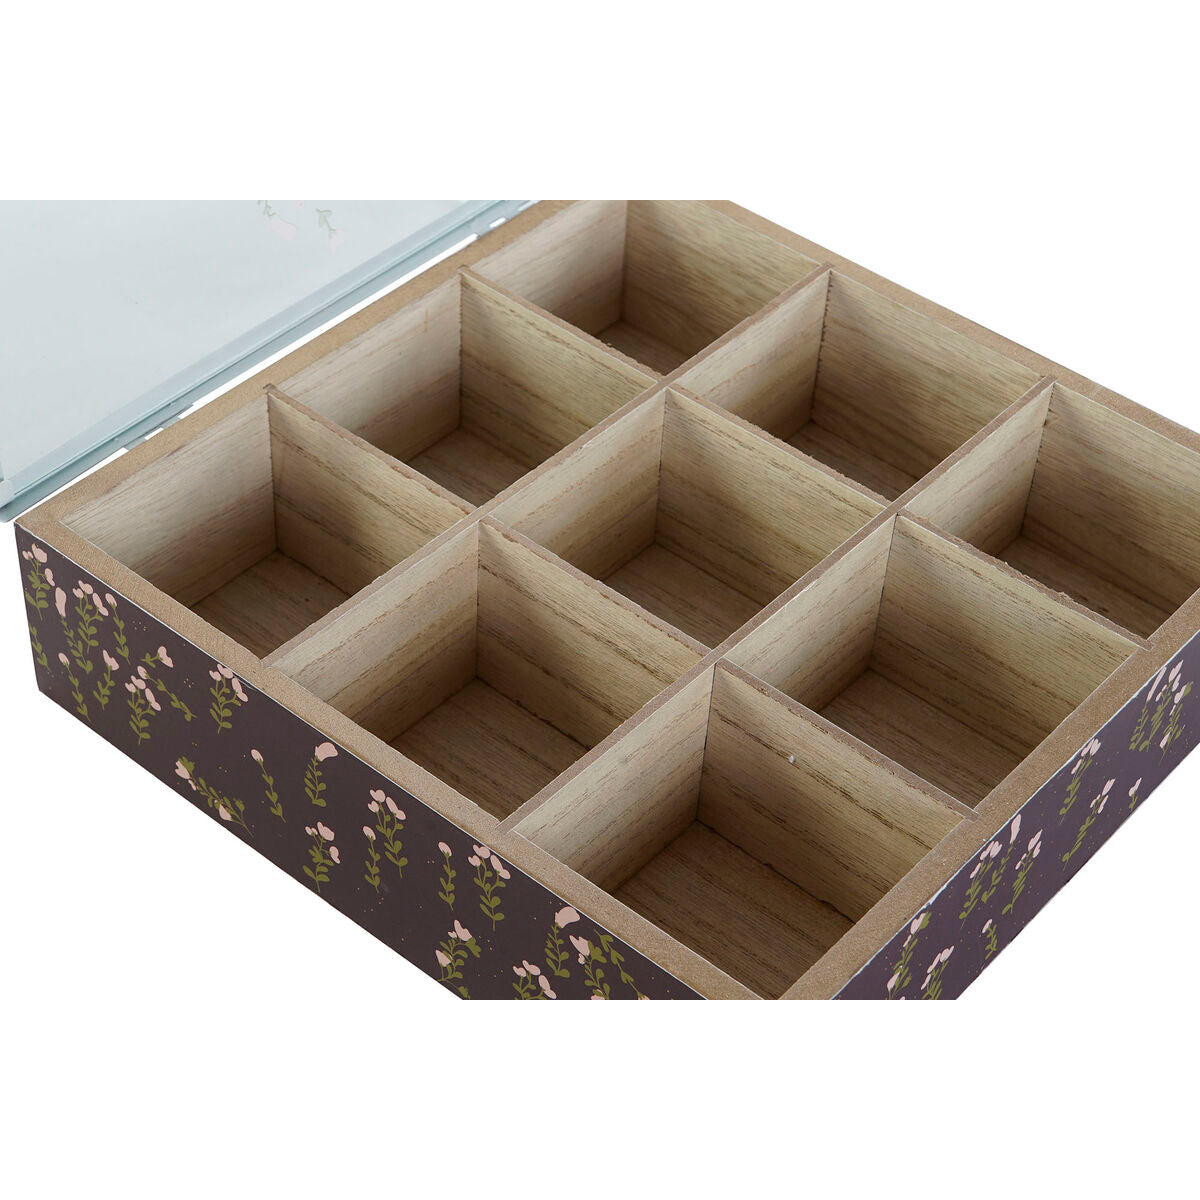 Box for Infusions DKD Home Decor Groen Mosterd Donkerbruin Metaal Kristal Hout MDF (4 Stuks)